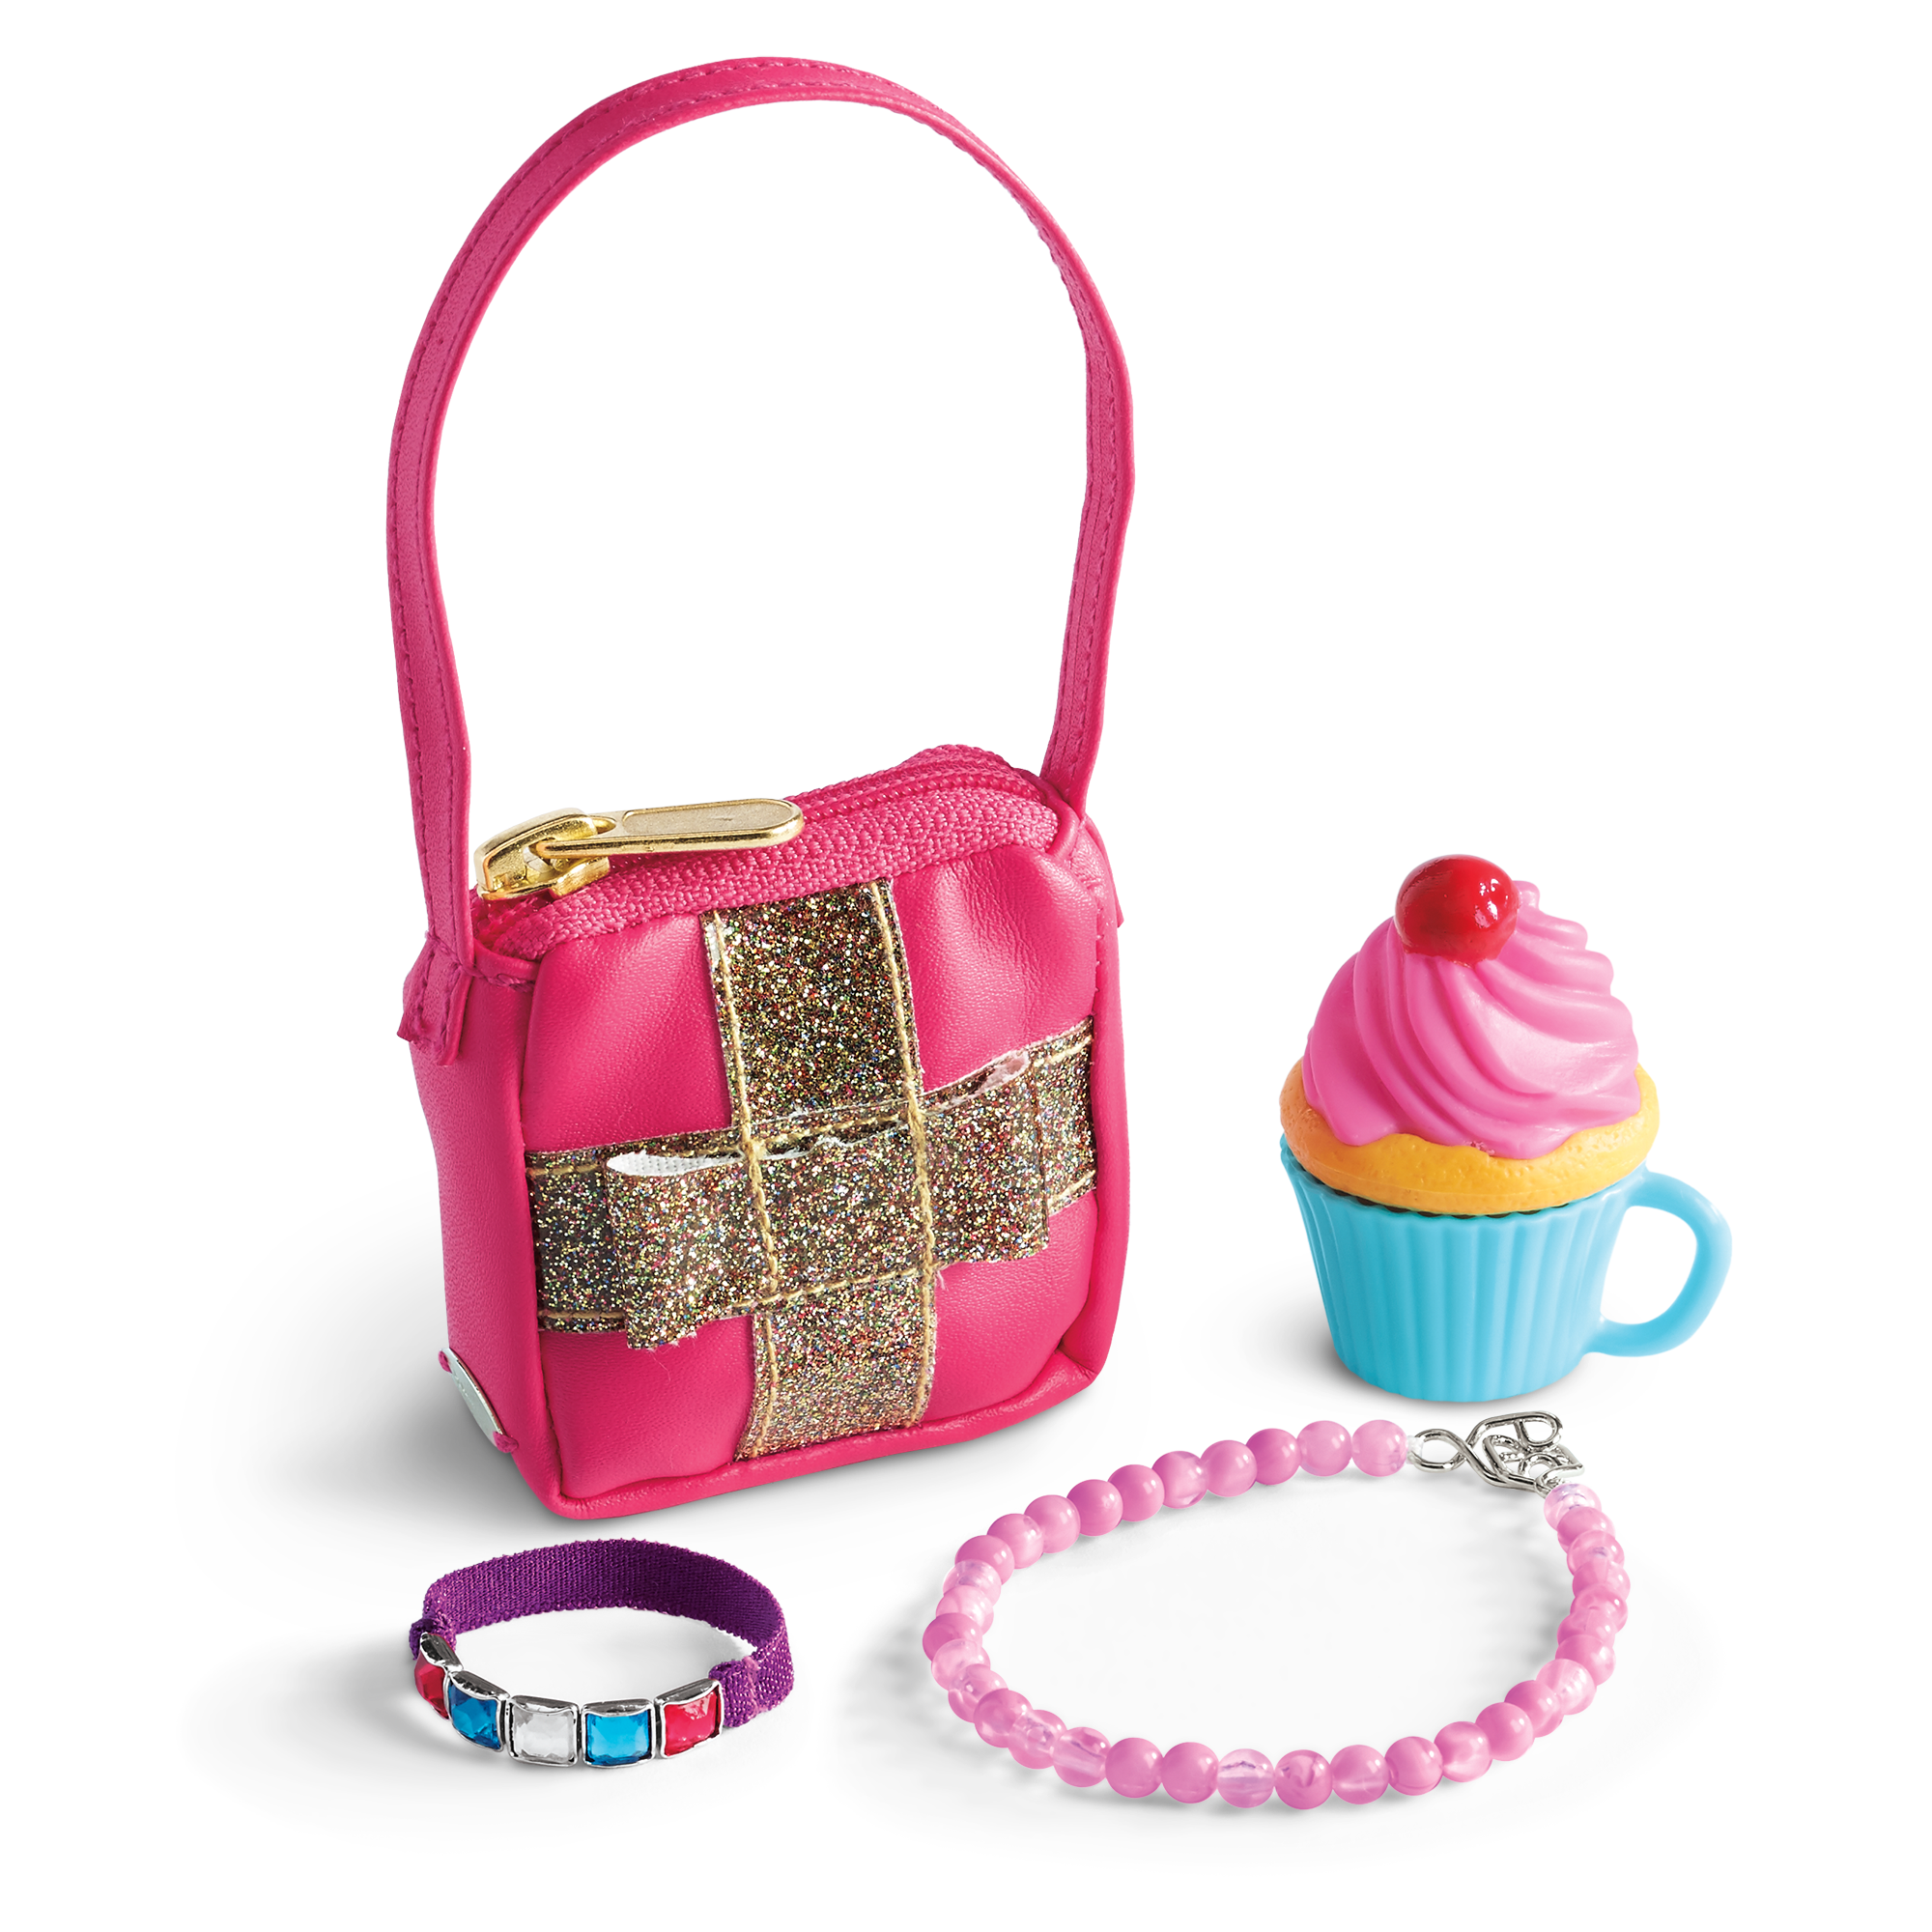 AMERICAN GIRL LET'S CELEBRATE ACCESSORIES 4 DOLL PURSE BRACELET CUPCAKE NECKLACE 